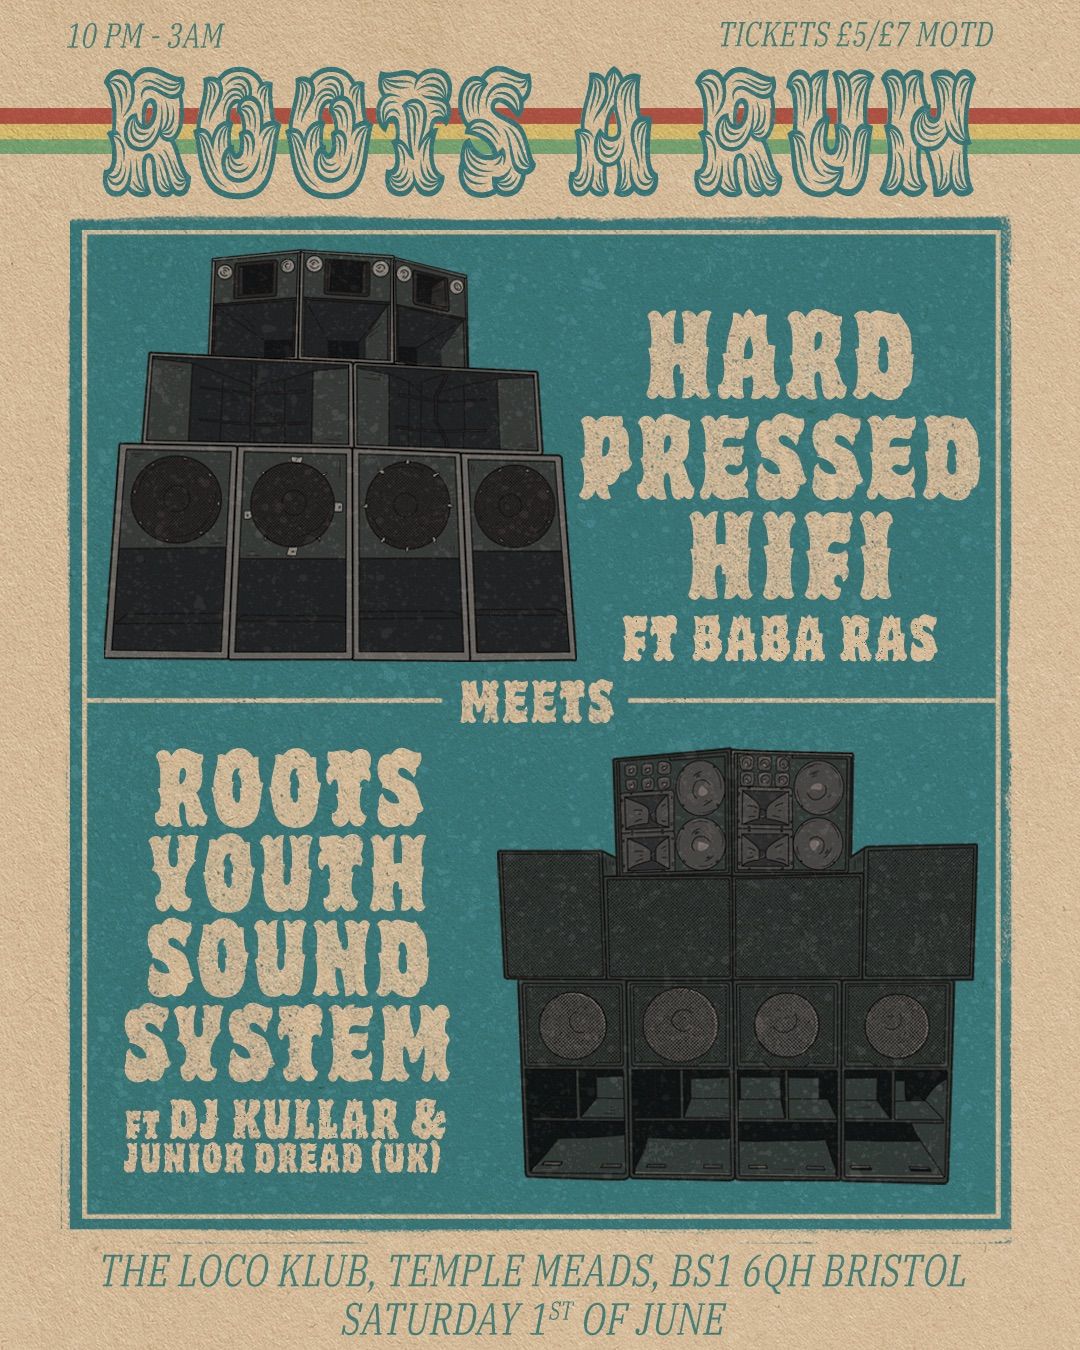 Roots A Run! Hard Pressed HiFi meets Roots Youth Sound System 